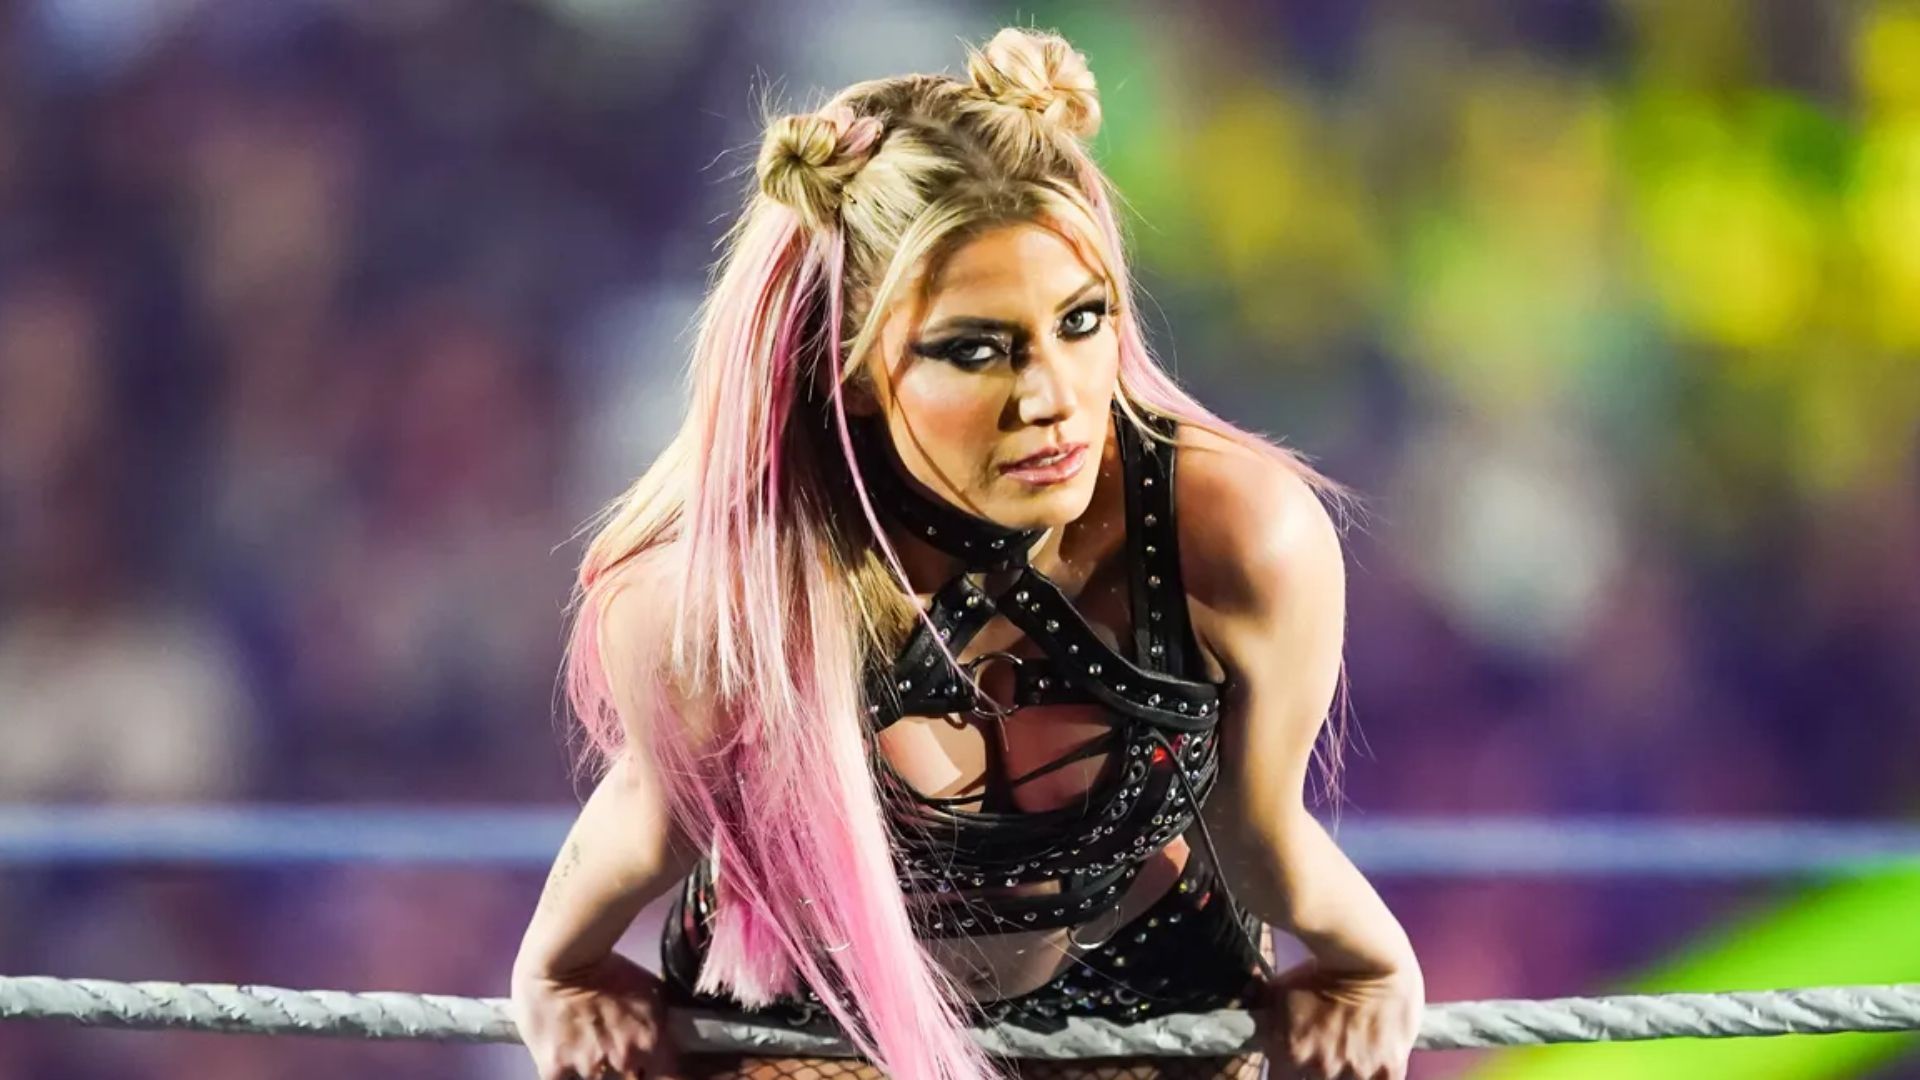 When do you think Alexa Bliss will return to WWE?